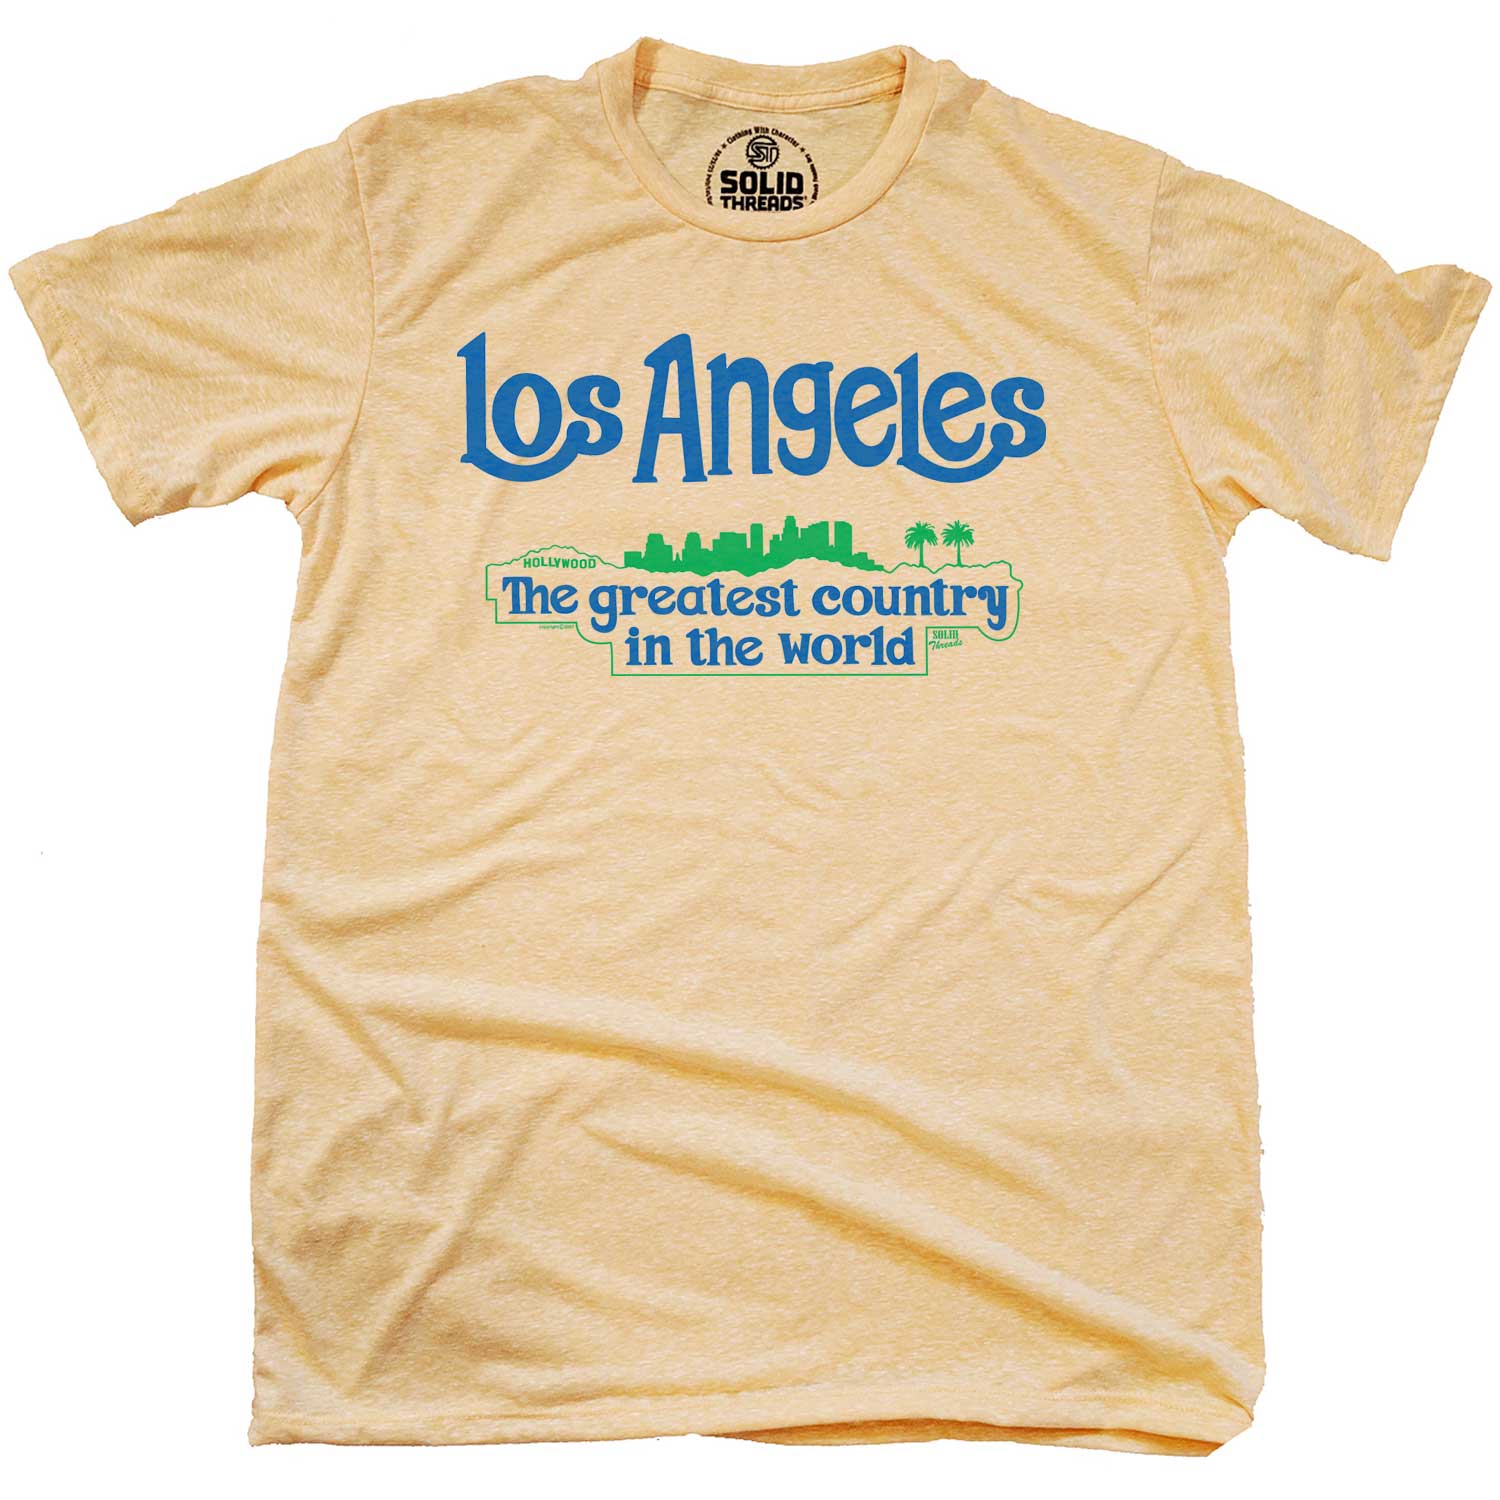 Men's Los Angeles The Greatest Country Retro Graphic T-Shirt | Funny California Tee | Solid Threads